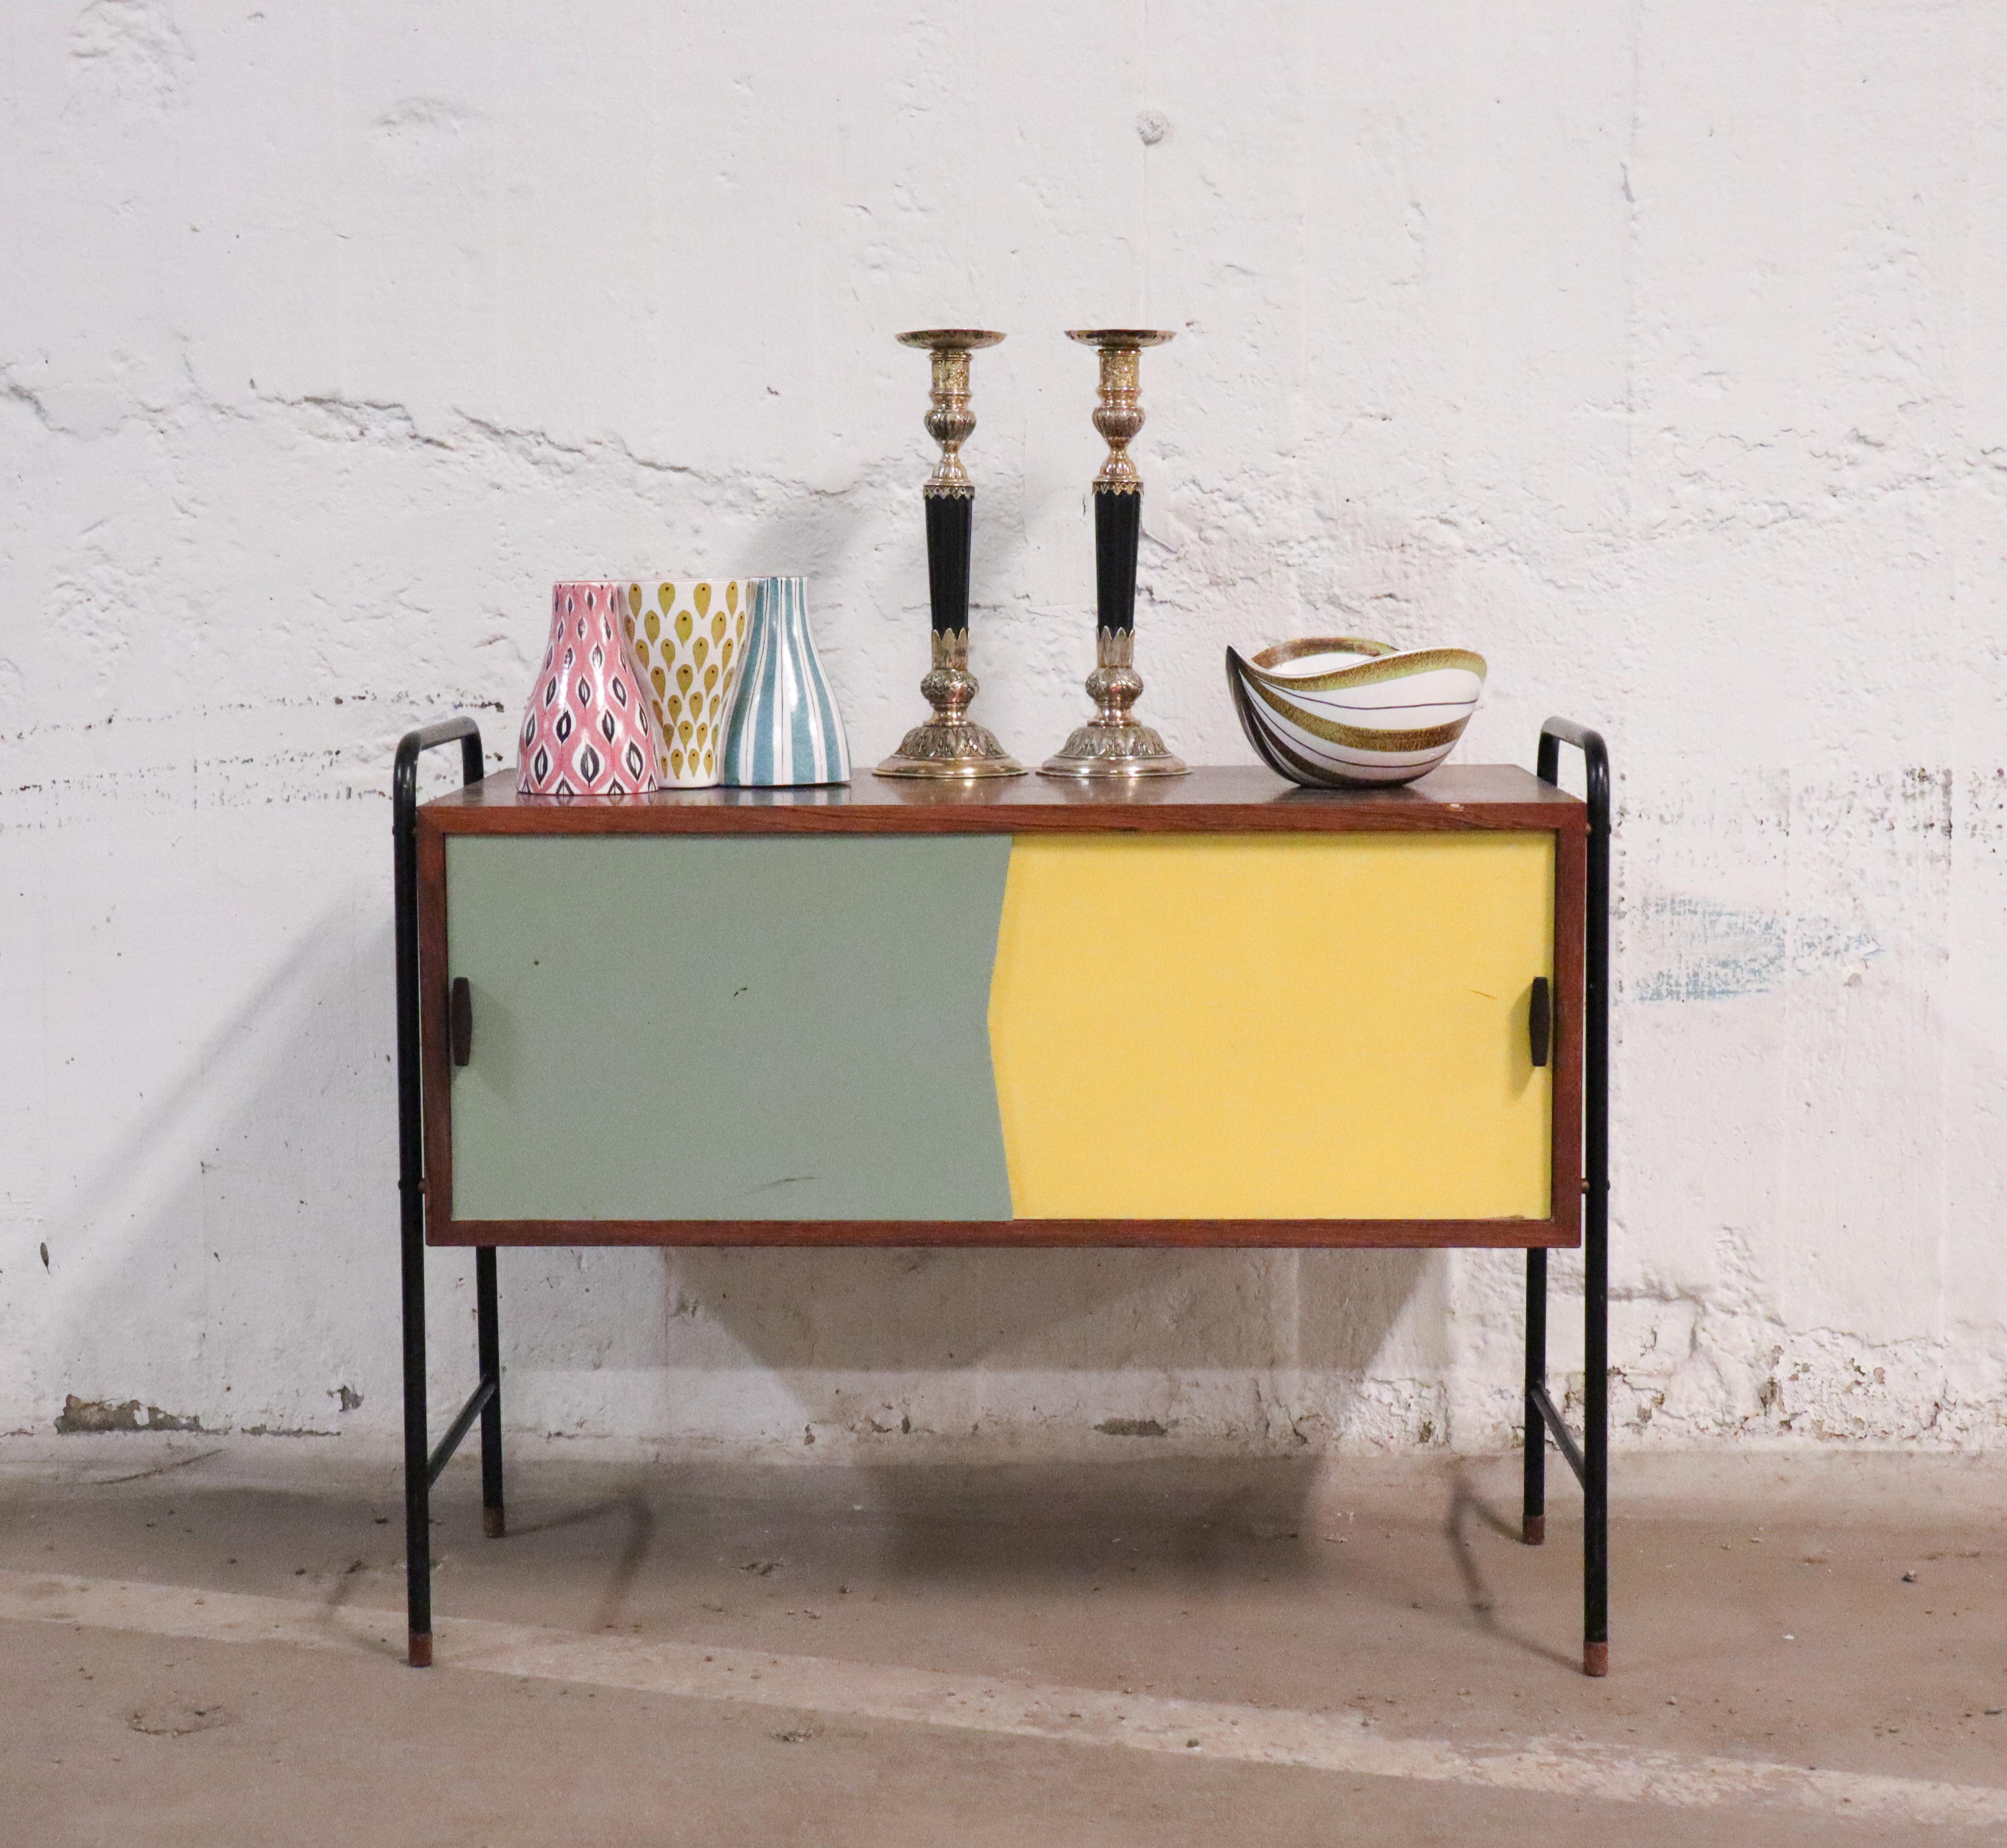 A lovely small side board from the 1950s probably designed in Denmark by unknown maker. The sideboard do have two sliding doors in yellow and gray. It is 54 cm high and is in very good condition except from a small mark at the edge and some minor